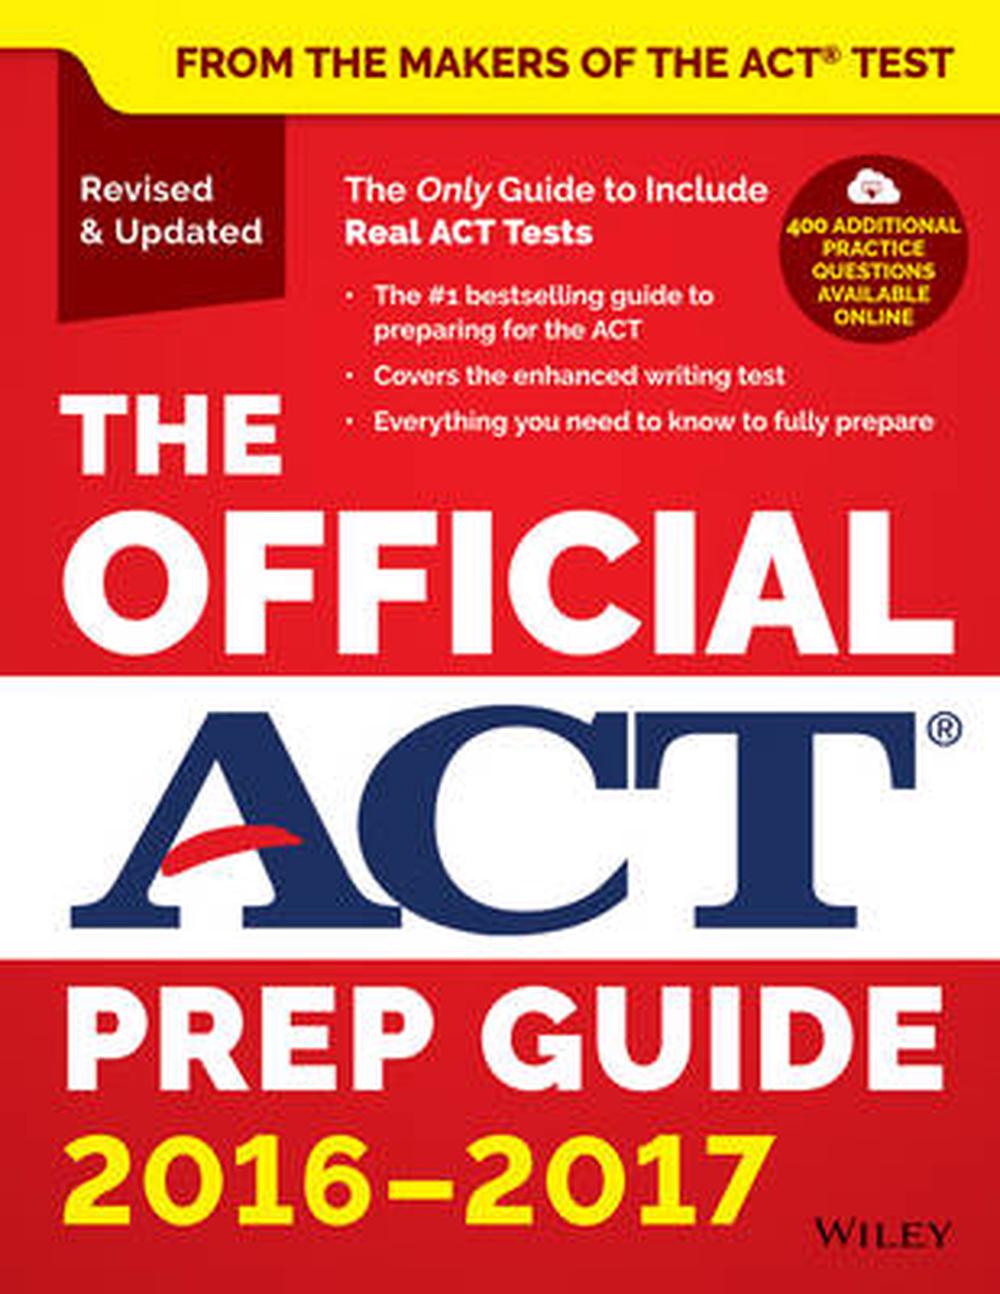 The Official Act Prep Guide, 20162017 (Book + Bonus Online Content) by